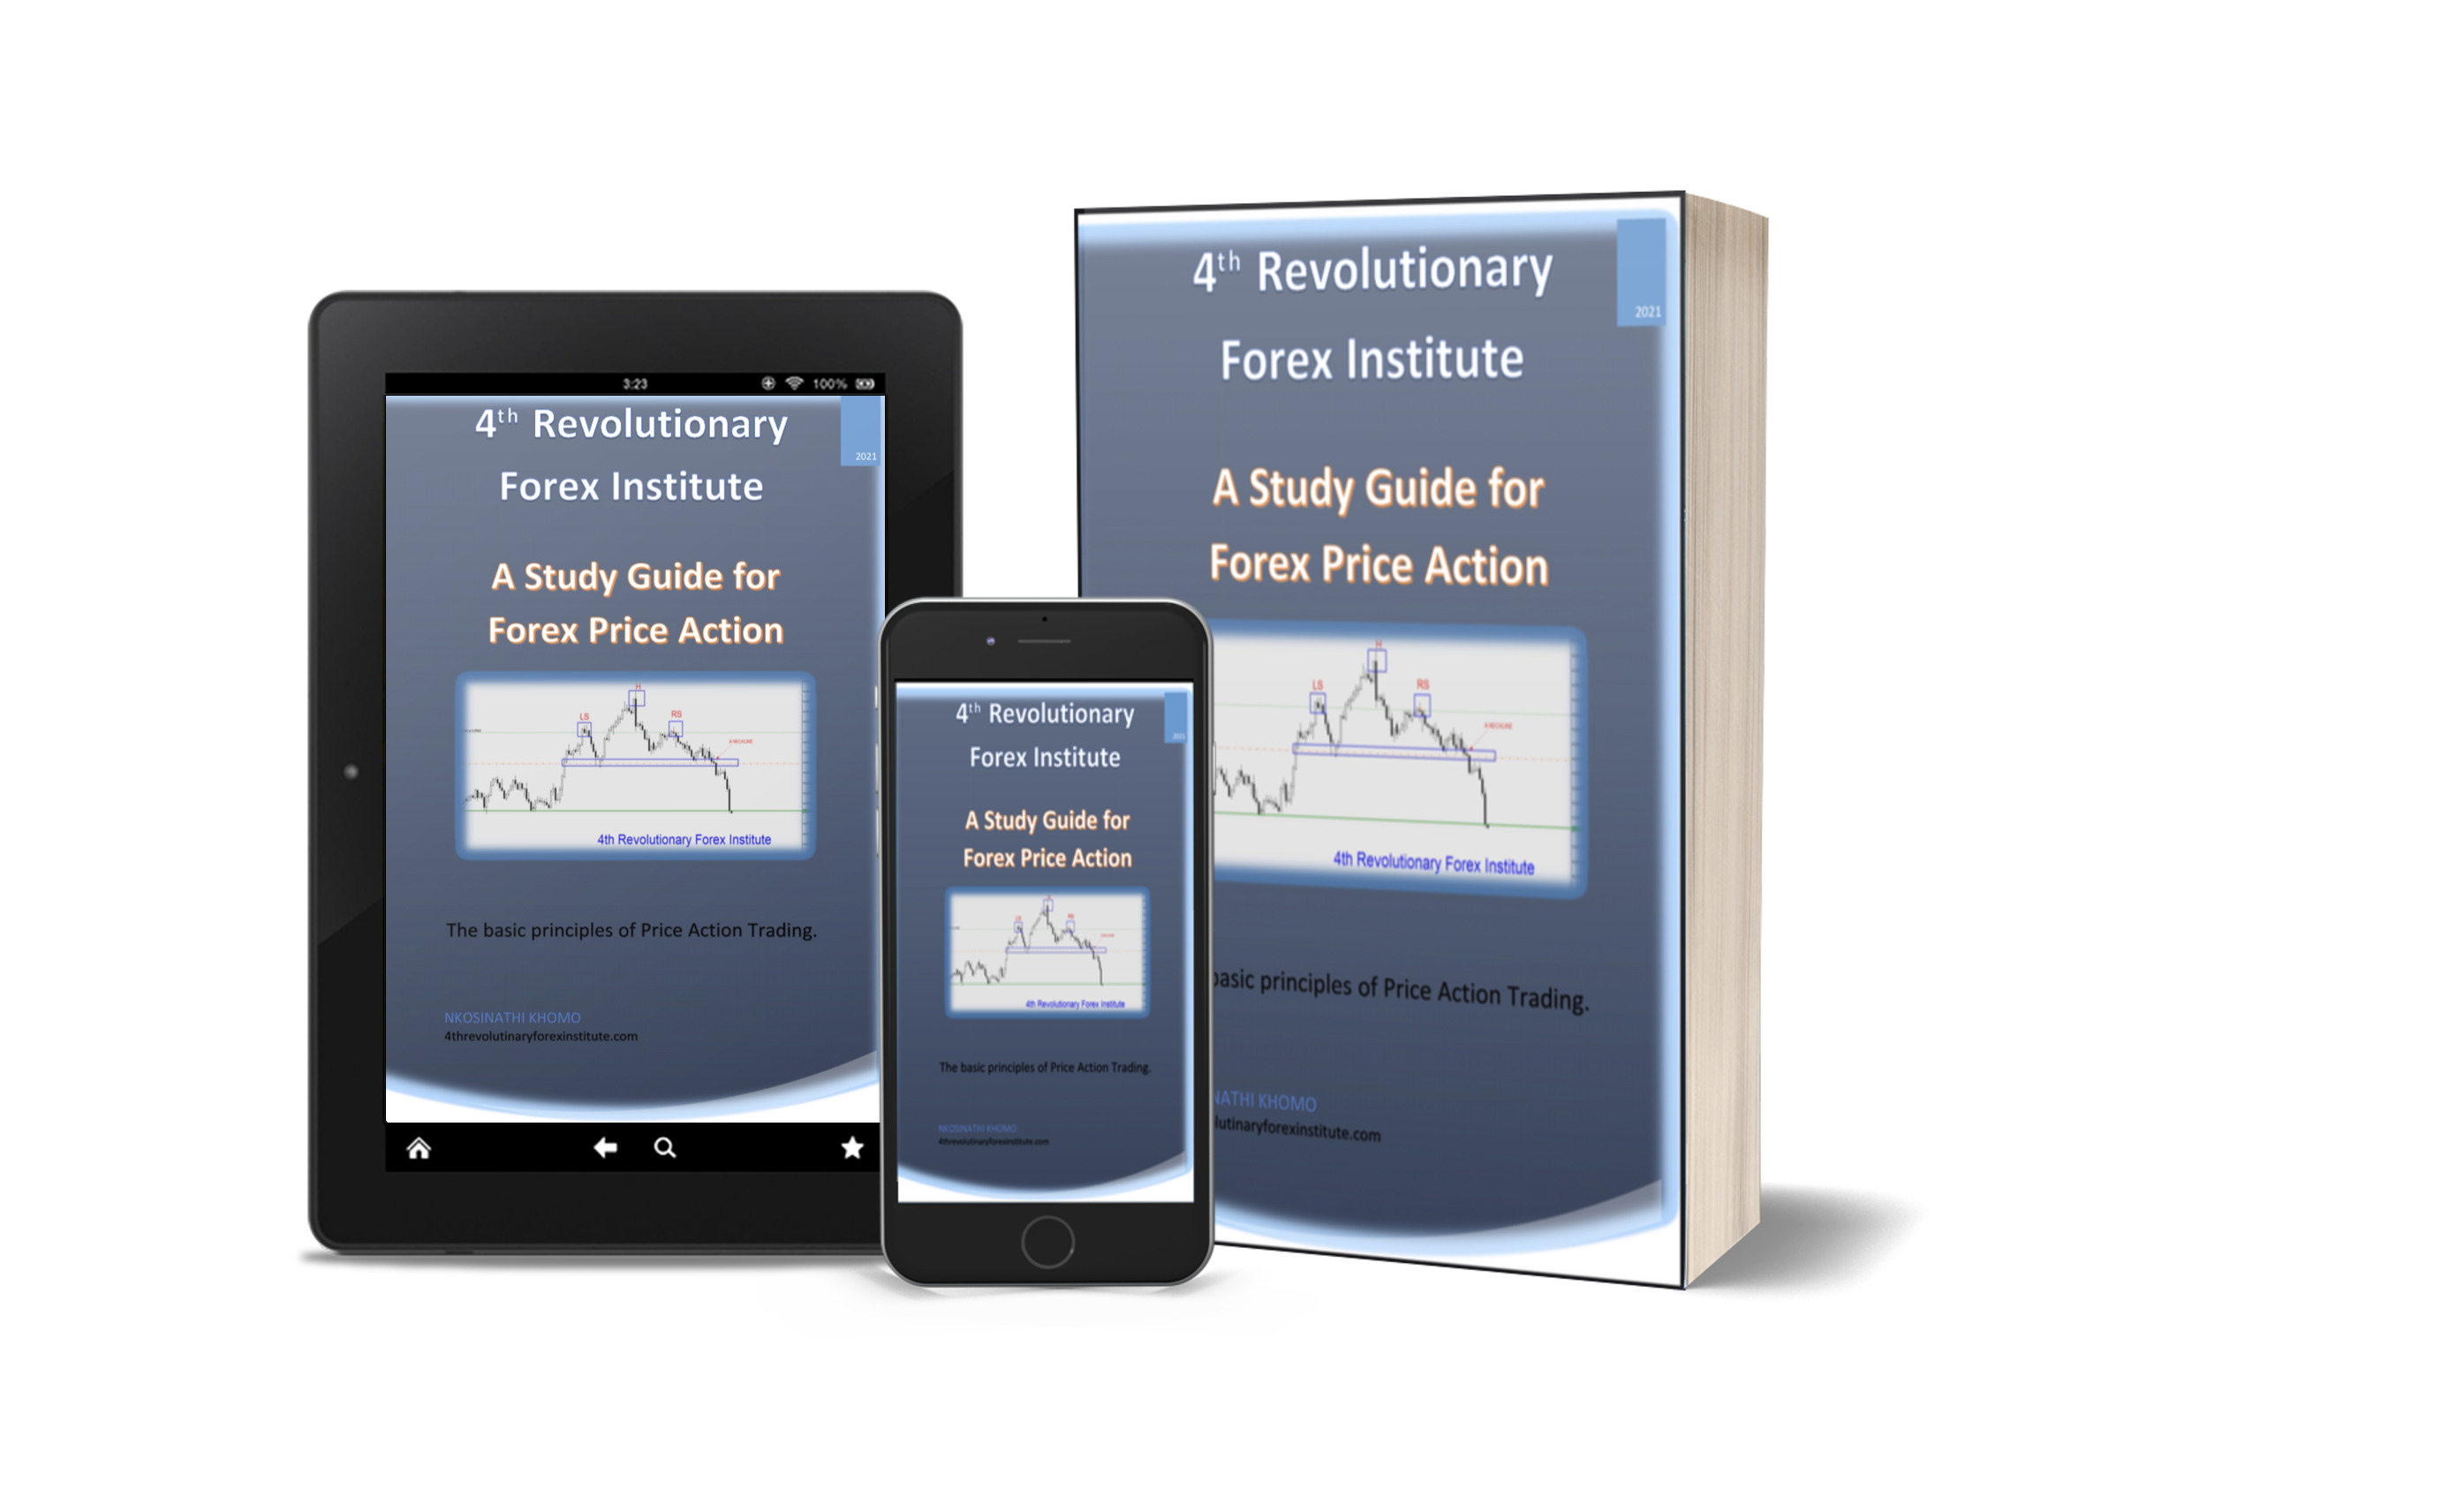 Price Action Study Guide